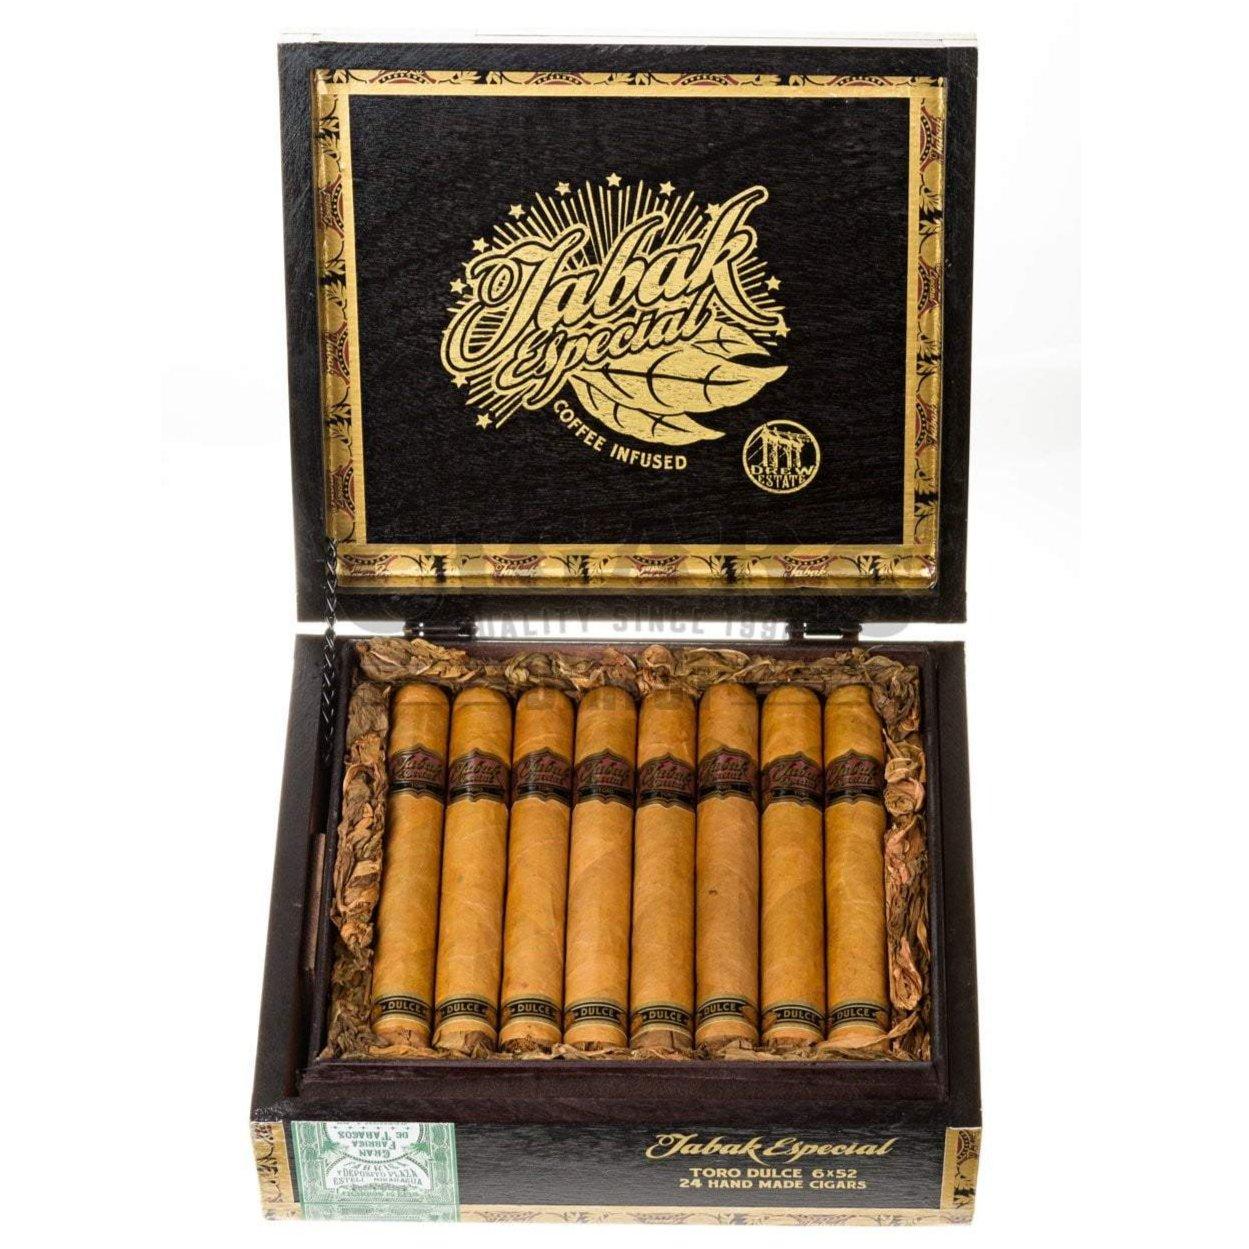 Drew Estate Tabak Especial Dulce Toro Cigars | Buy At Discount Prices ...